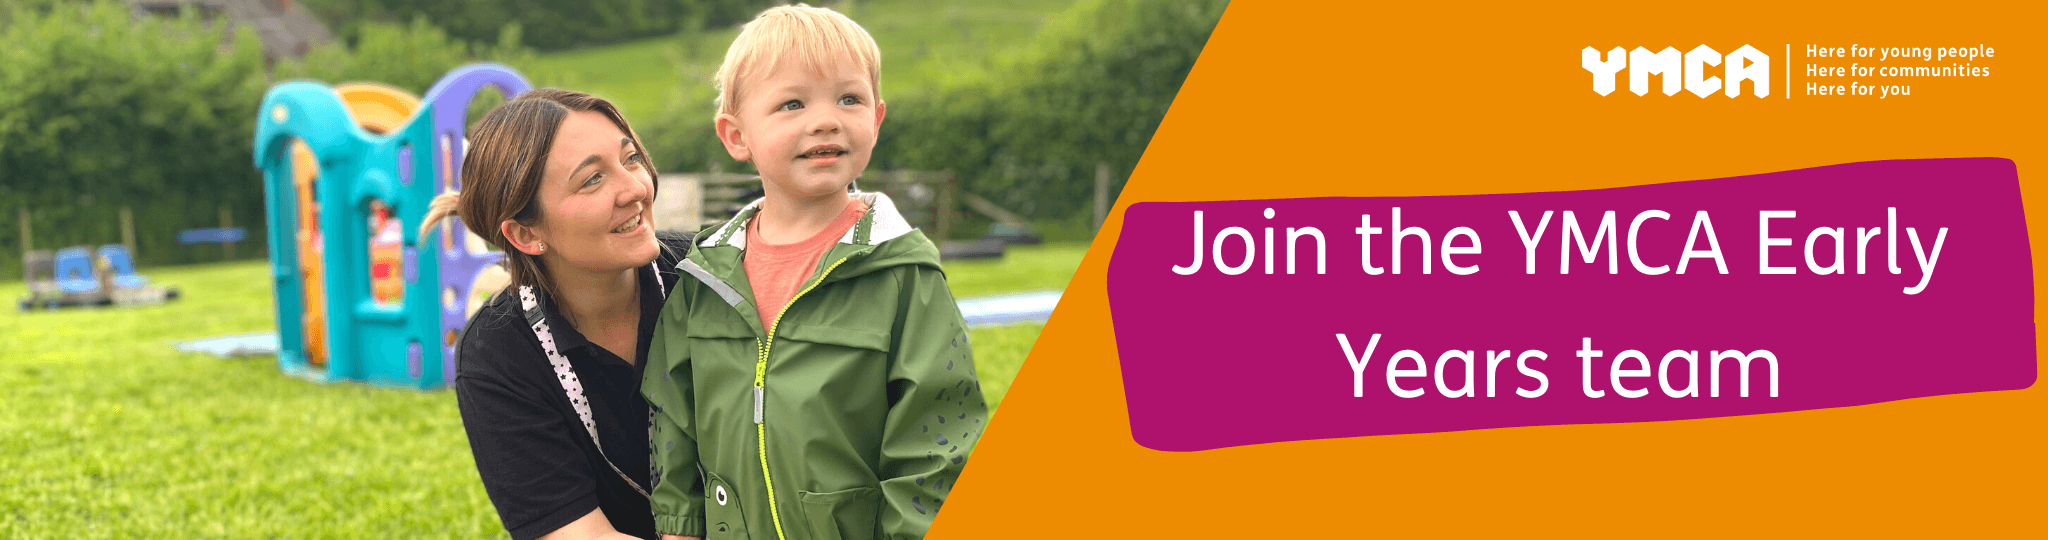 Join the YMCA Early Years team